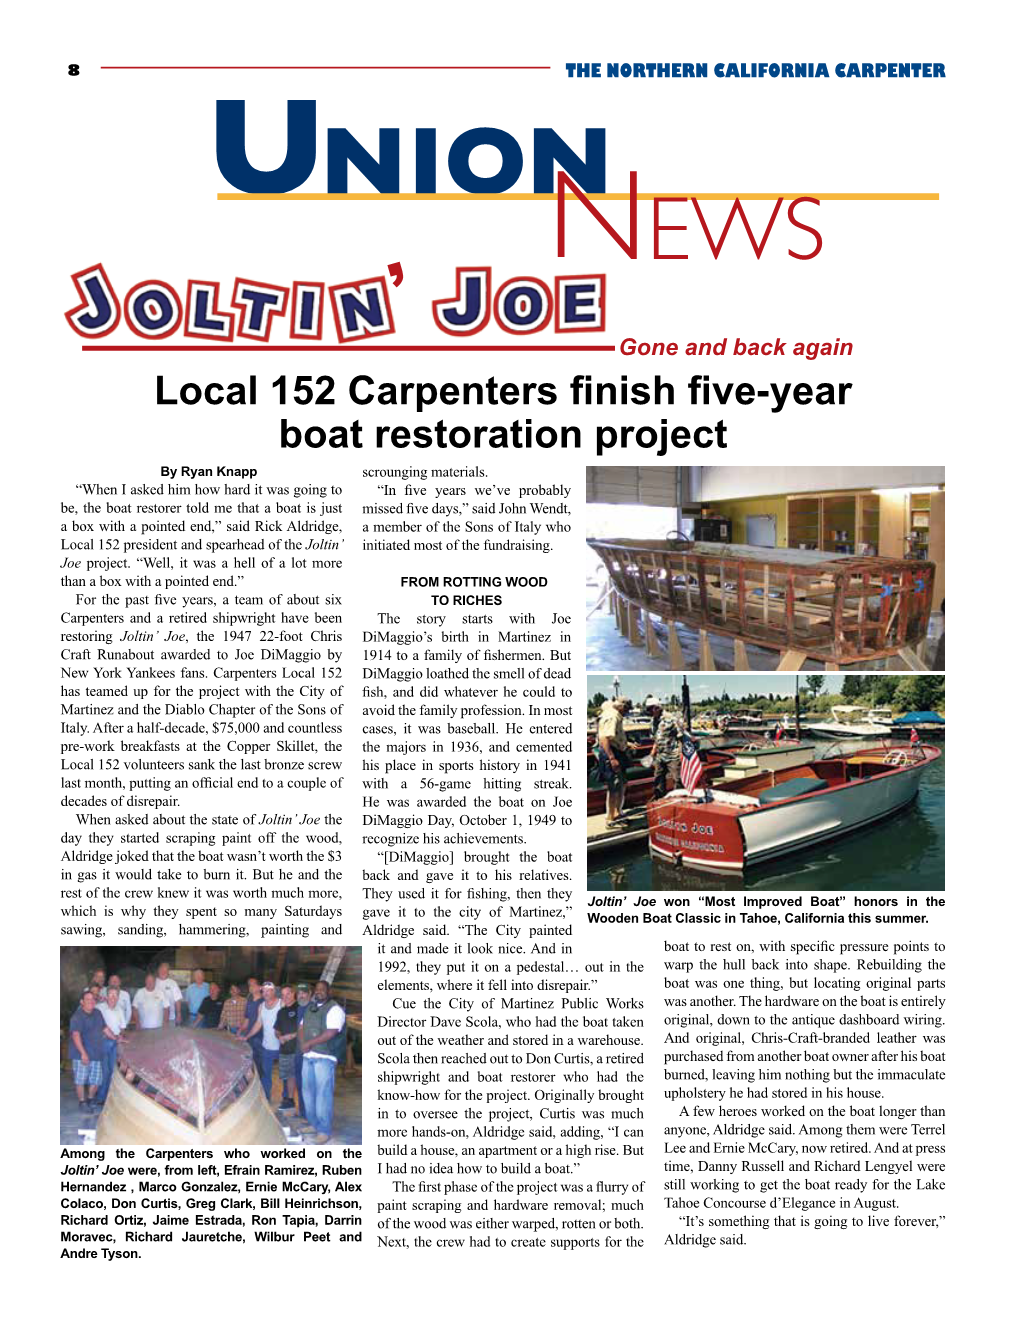 Local 152 Carpenters Finish Five-Year Boat Restoration Project by Ryan Knapp Scrounging Materials